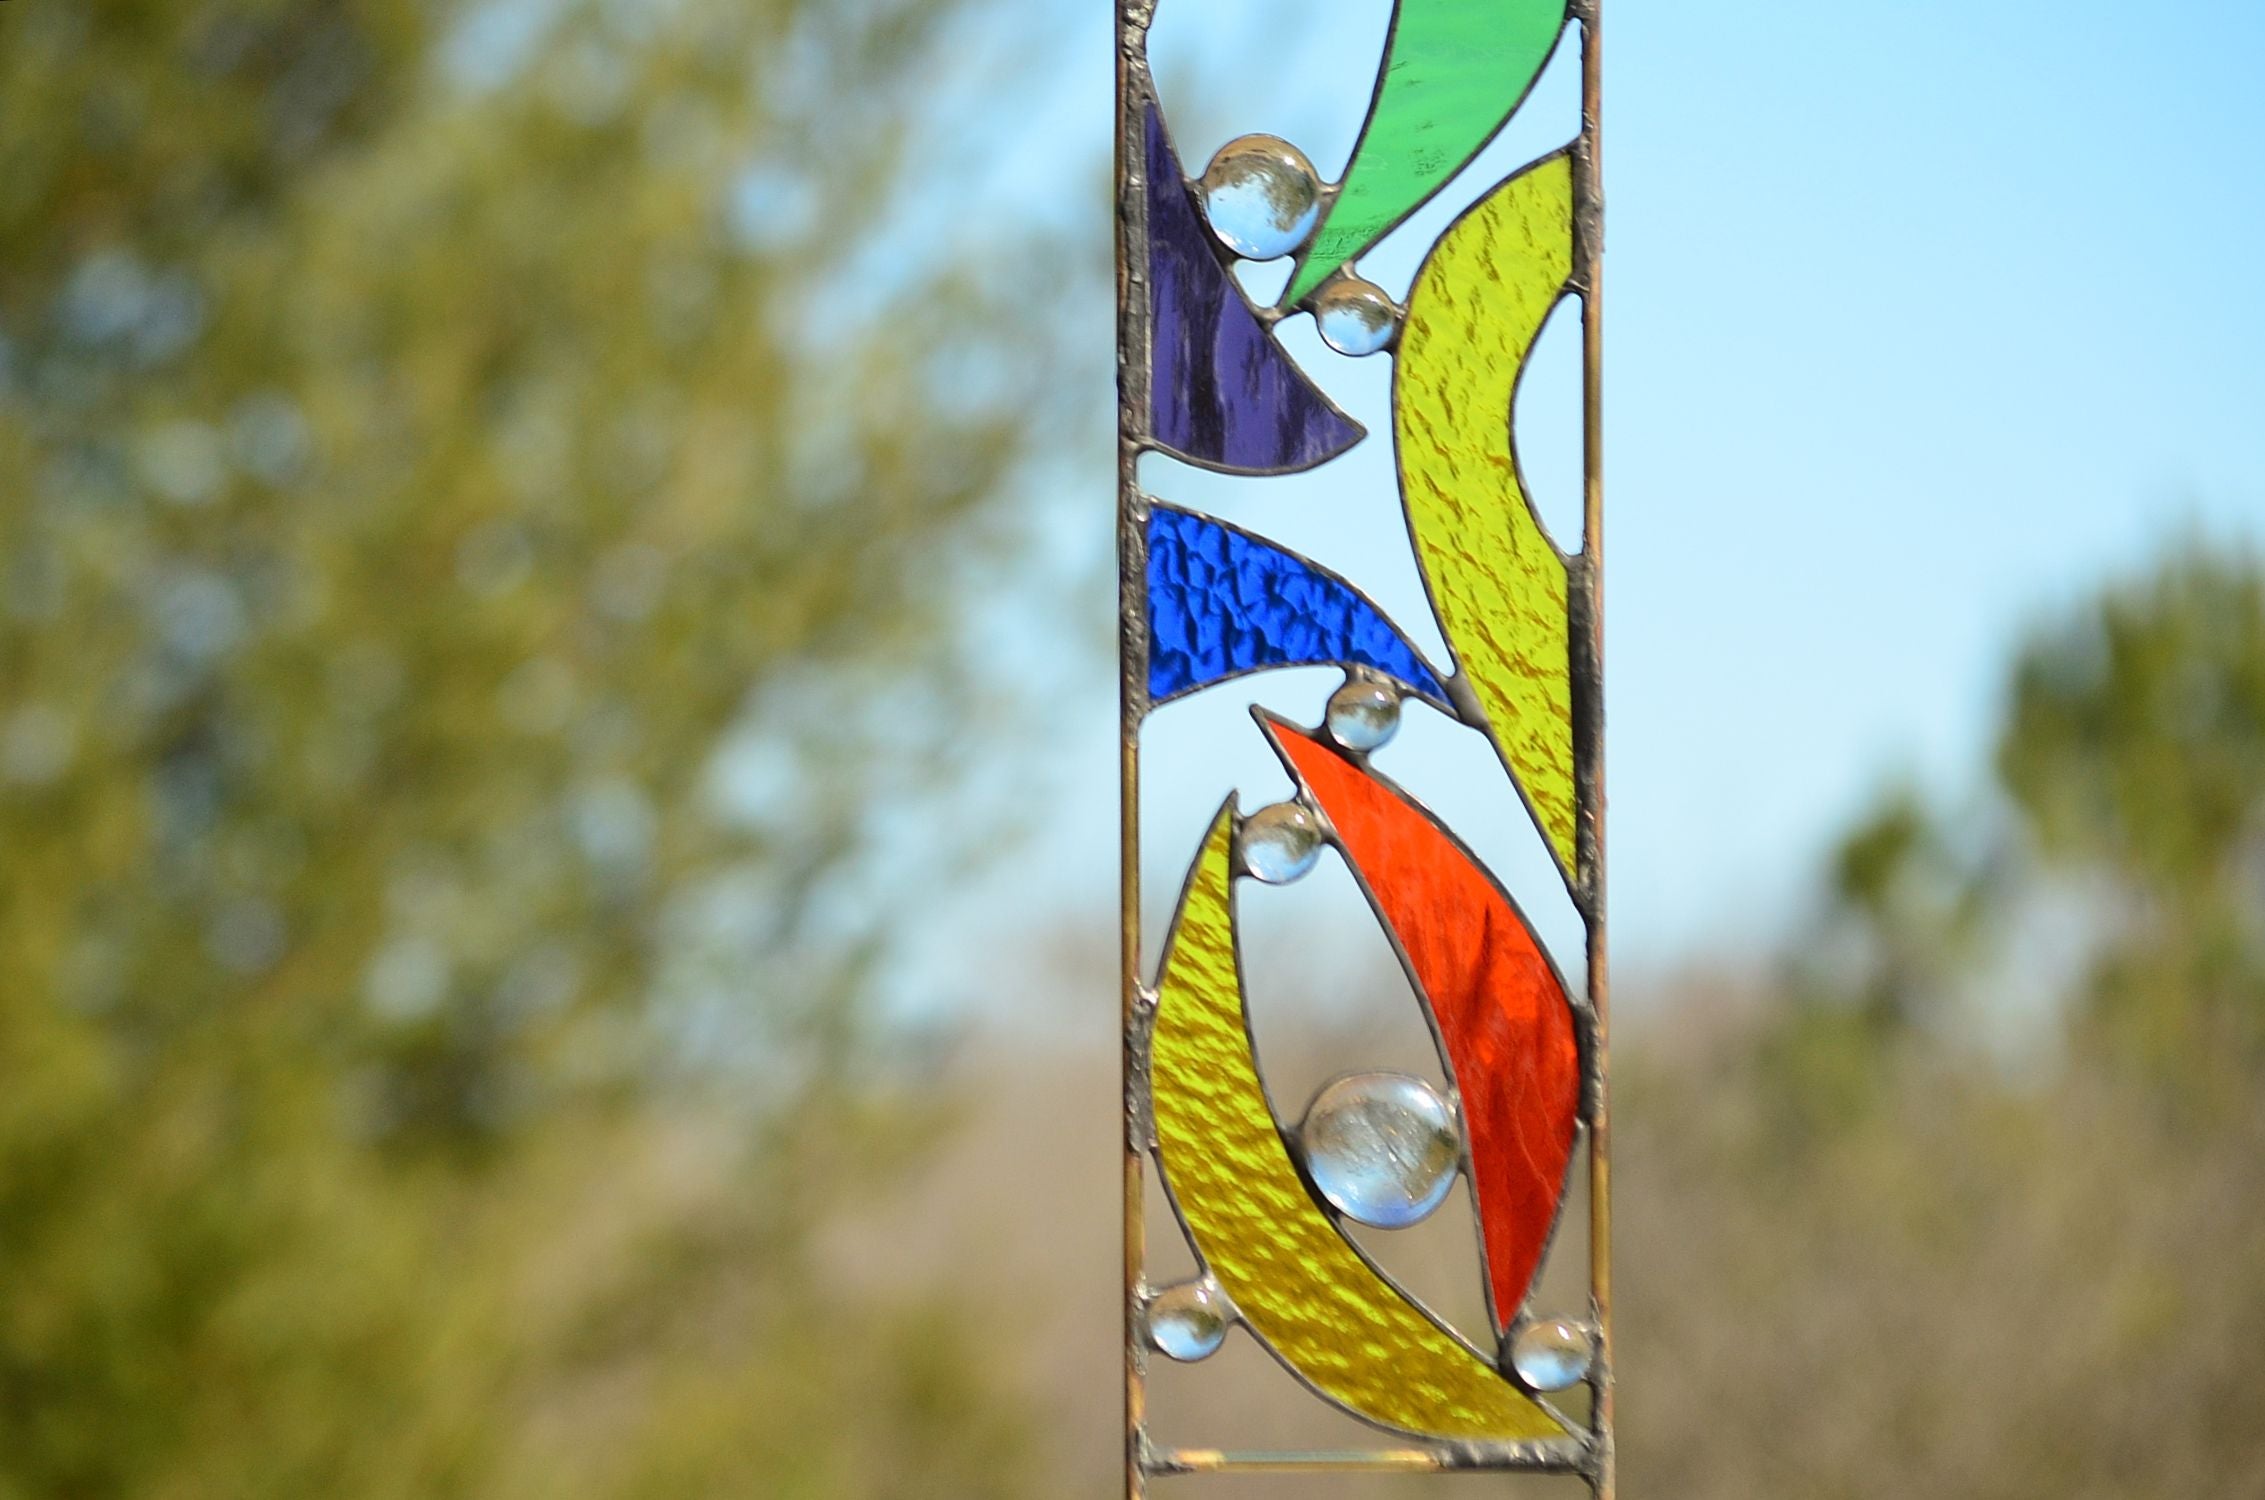 Stained Glass Garden Art in Vivid Colors for Outdoor Garden Decoration. &quot;Retro Rainbow&quot;